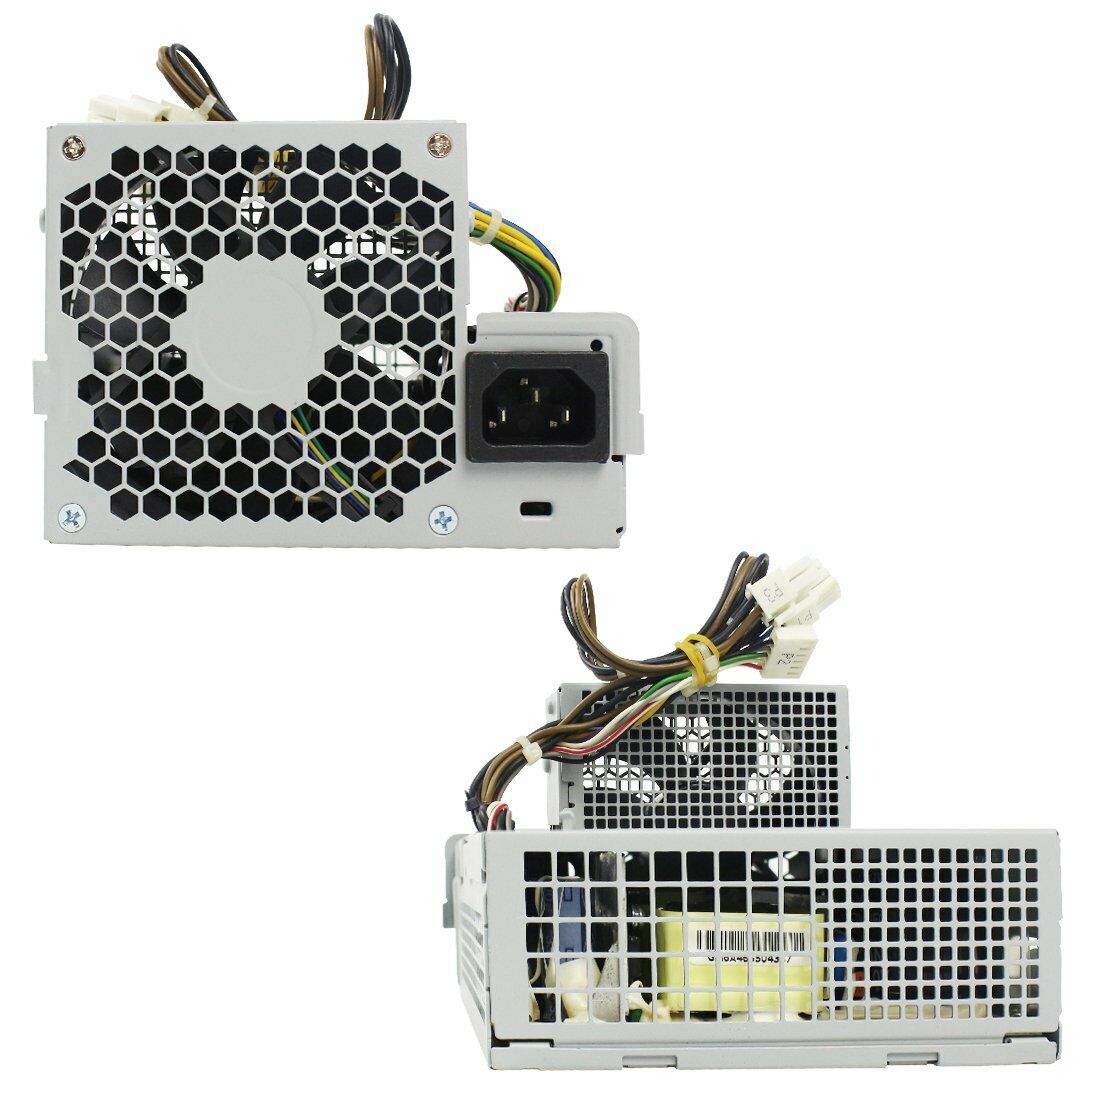 For HP Elite 8300 SFF Power Supply PS-4241-9HA PS-4241-9HB PC8027 PC9058 PC8019